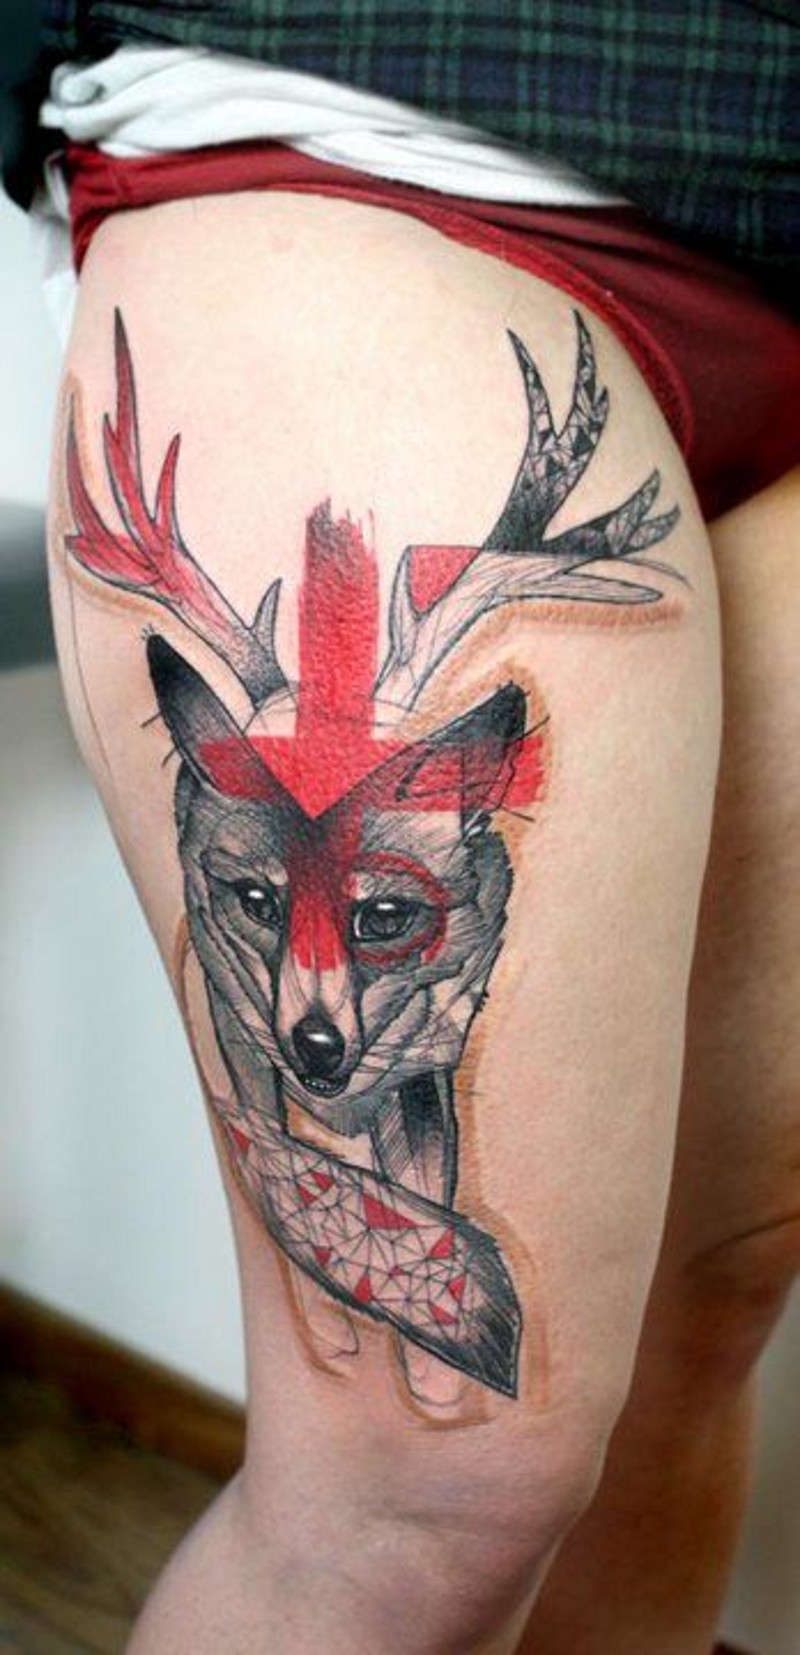 Sharp painted half colored fox with ornaments tattoo on thigh